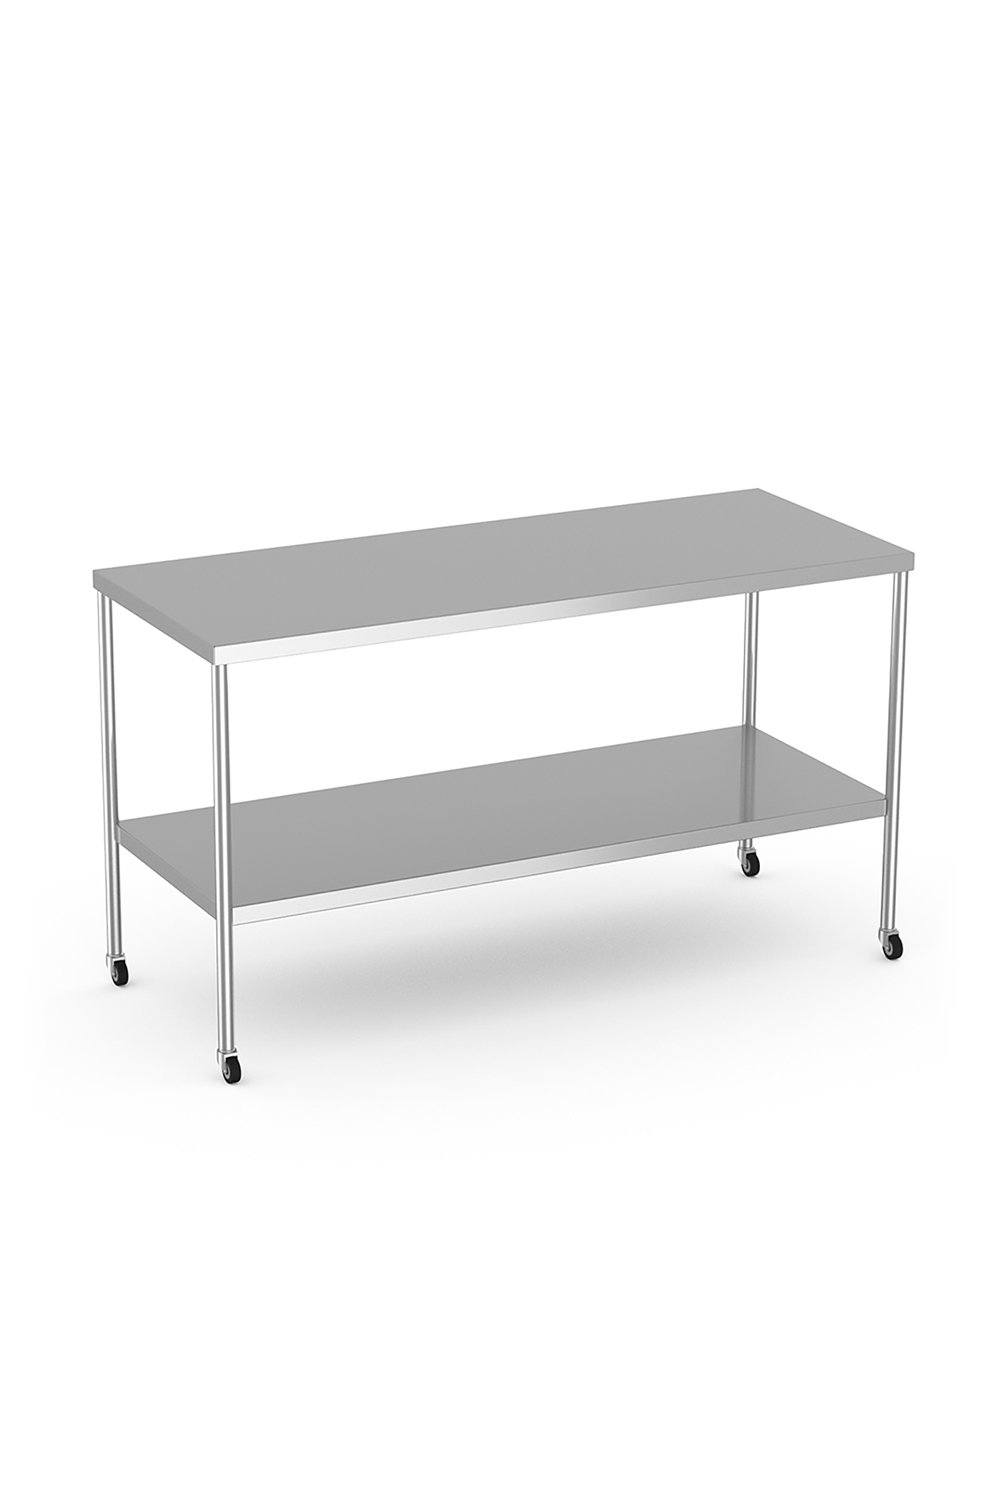 Stainless Steel Table Stainless Solutions Macmedical 24"D x 60"W x 34"H Under-shelf 